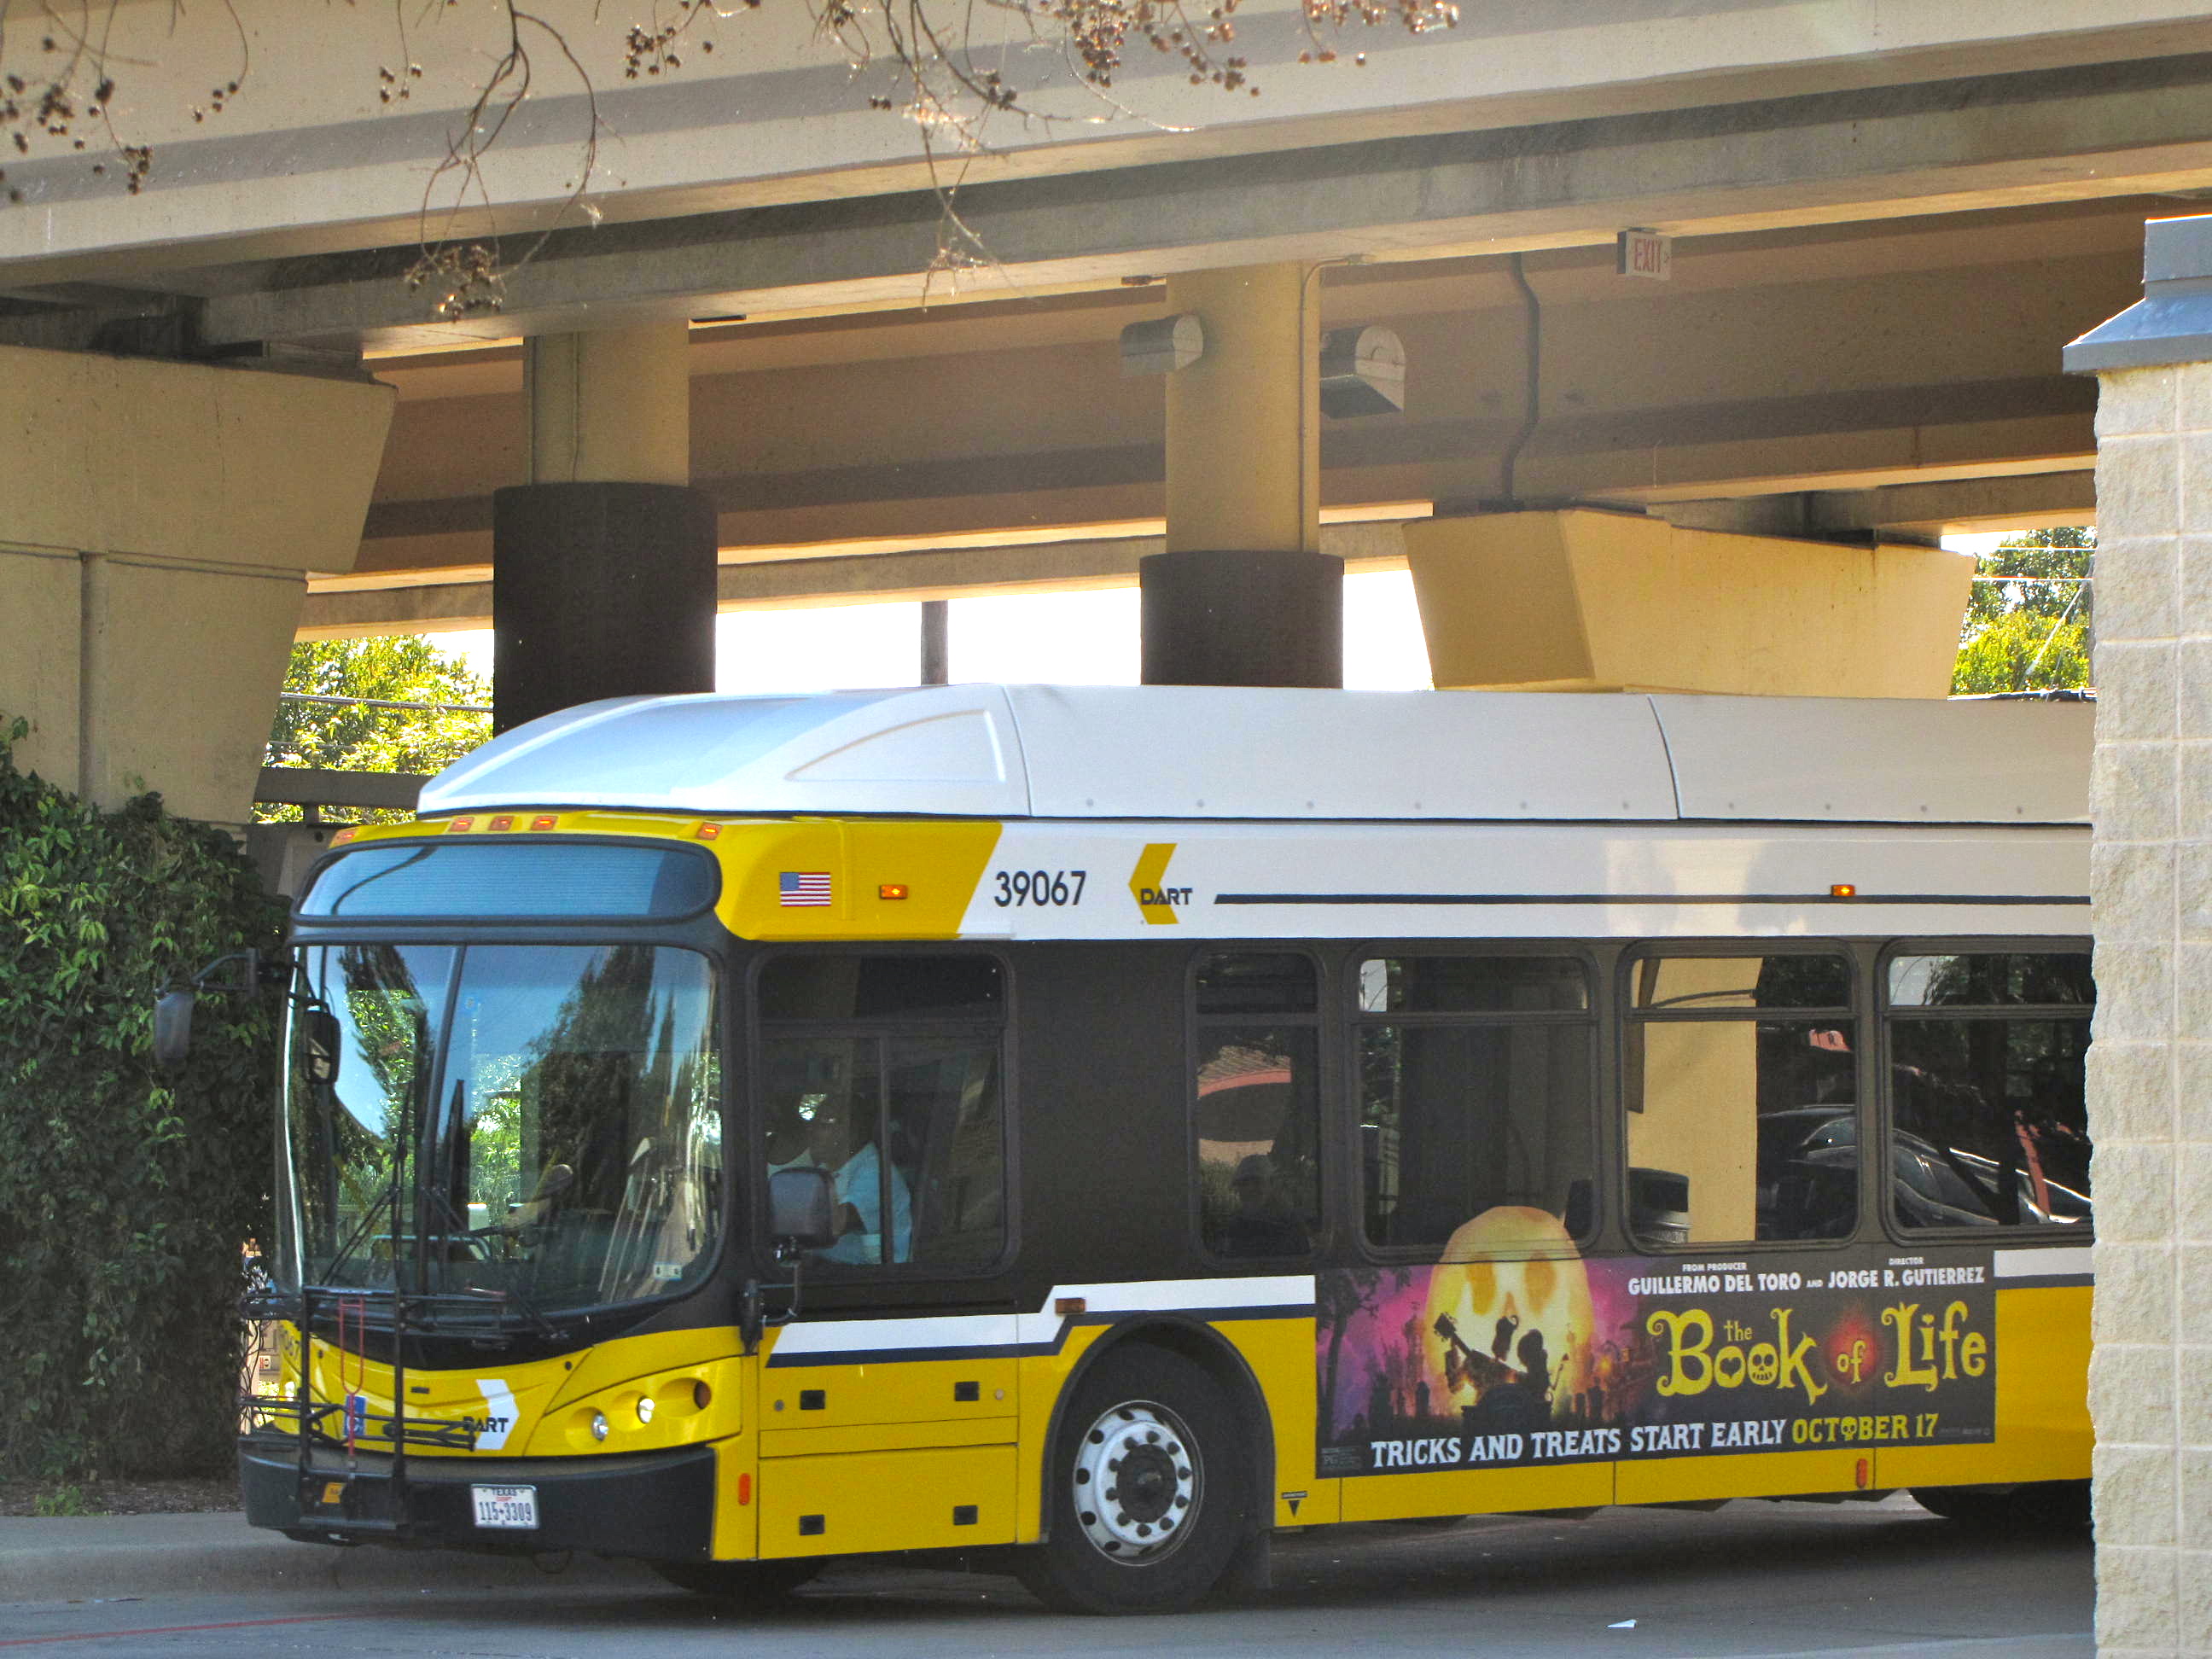 Dallas Public Transportation Employees Sent Home After Potential Ebola Exposure